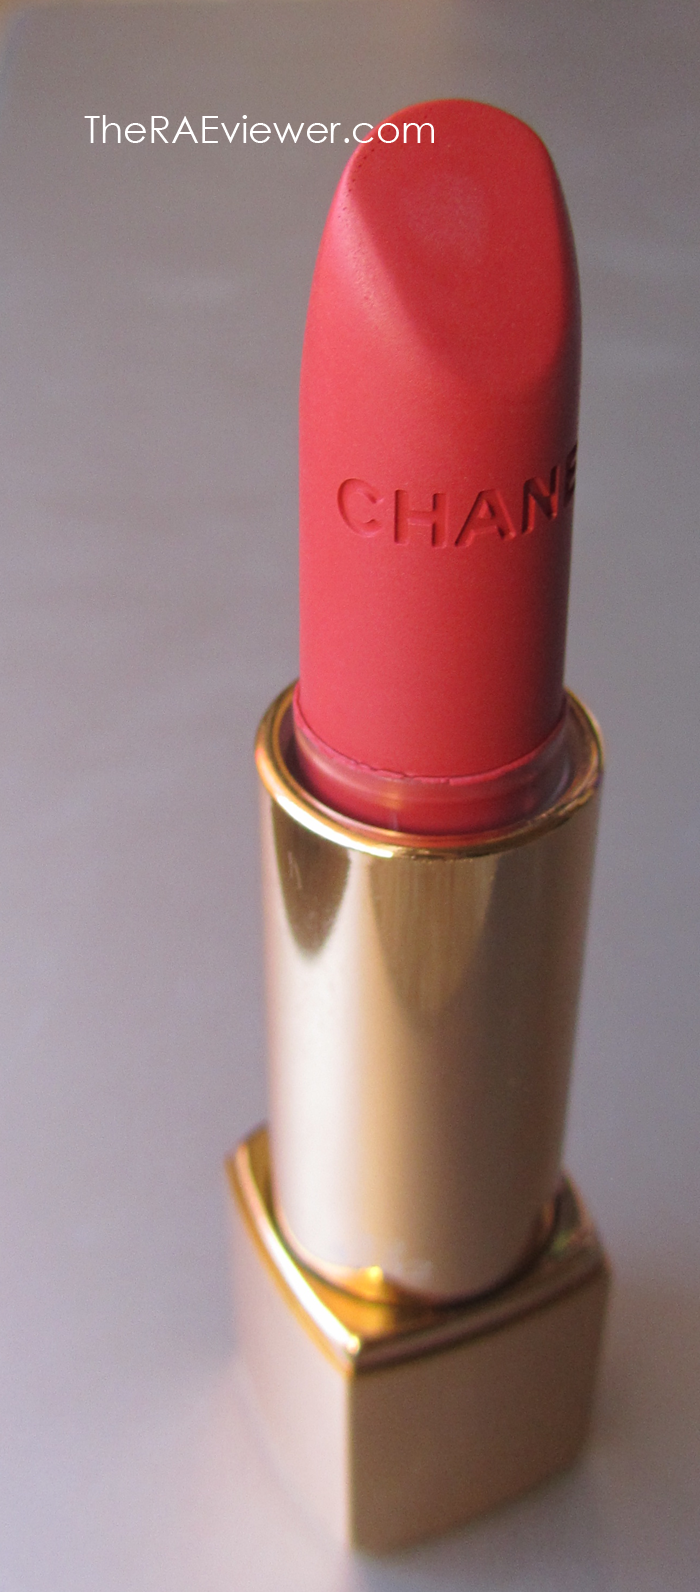 Chanel Rouge Allure Velvet, swatches & review